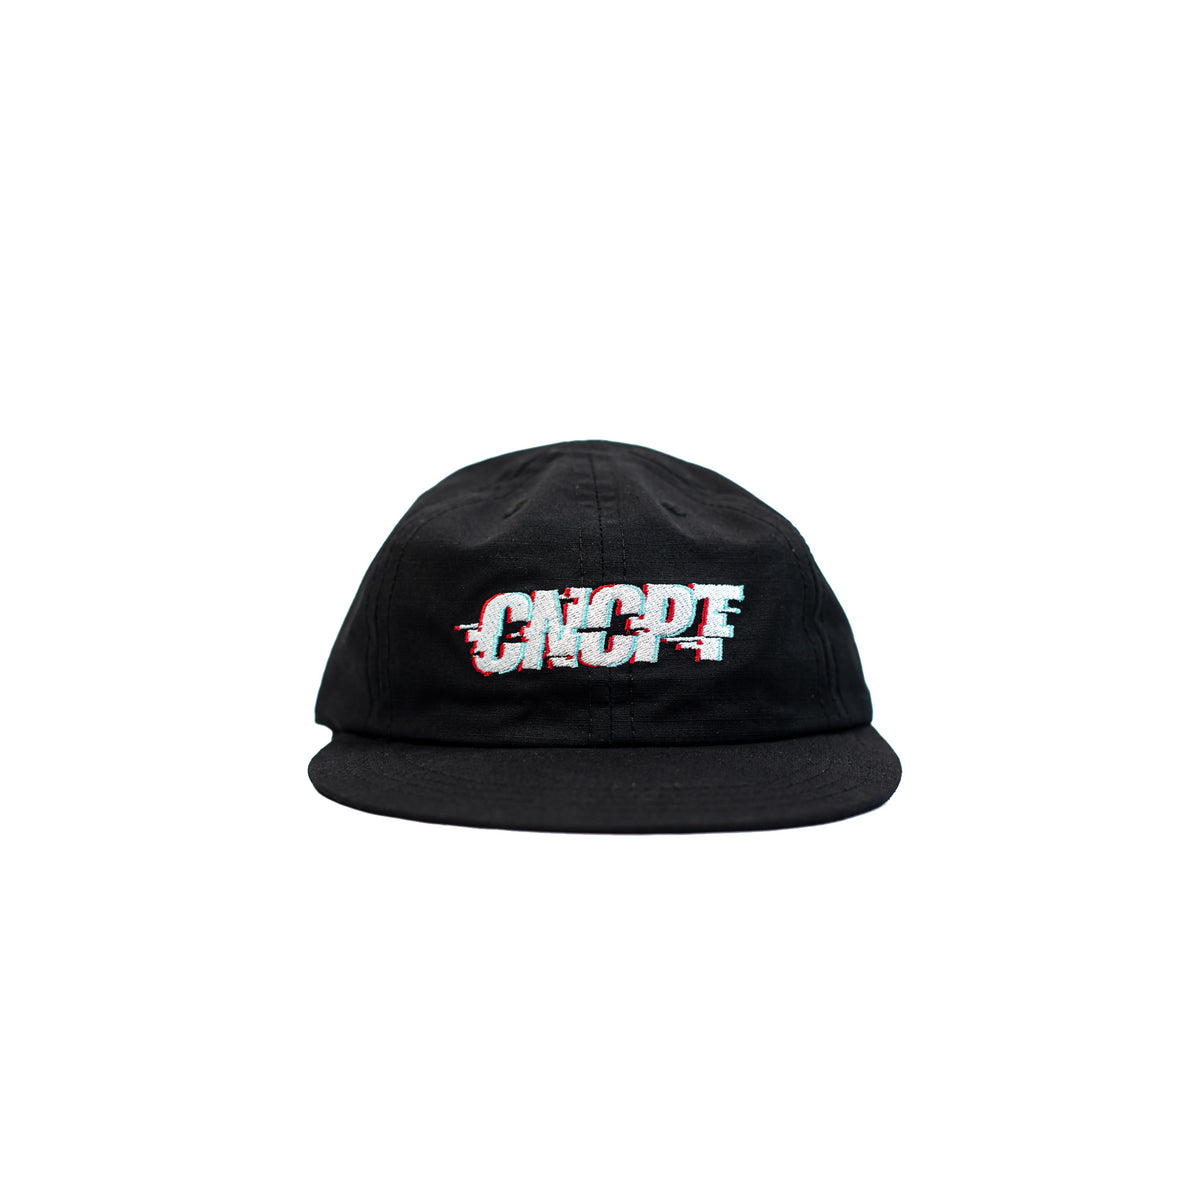 CNCPT - ANAGLYPH - HAT